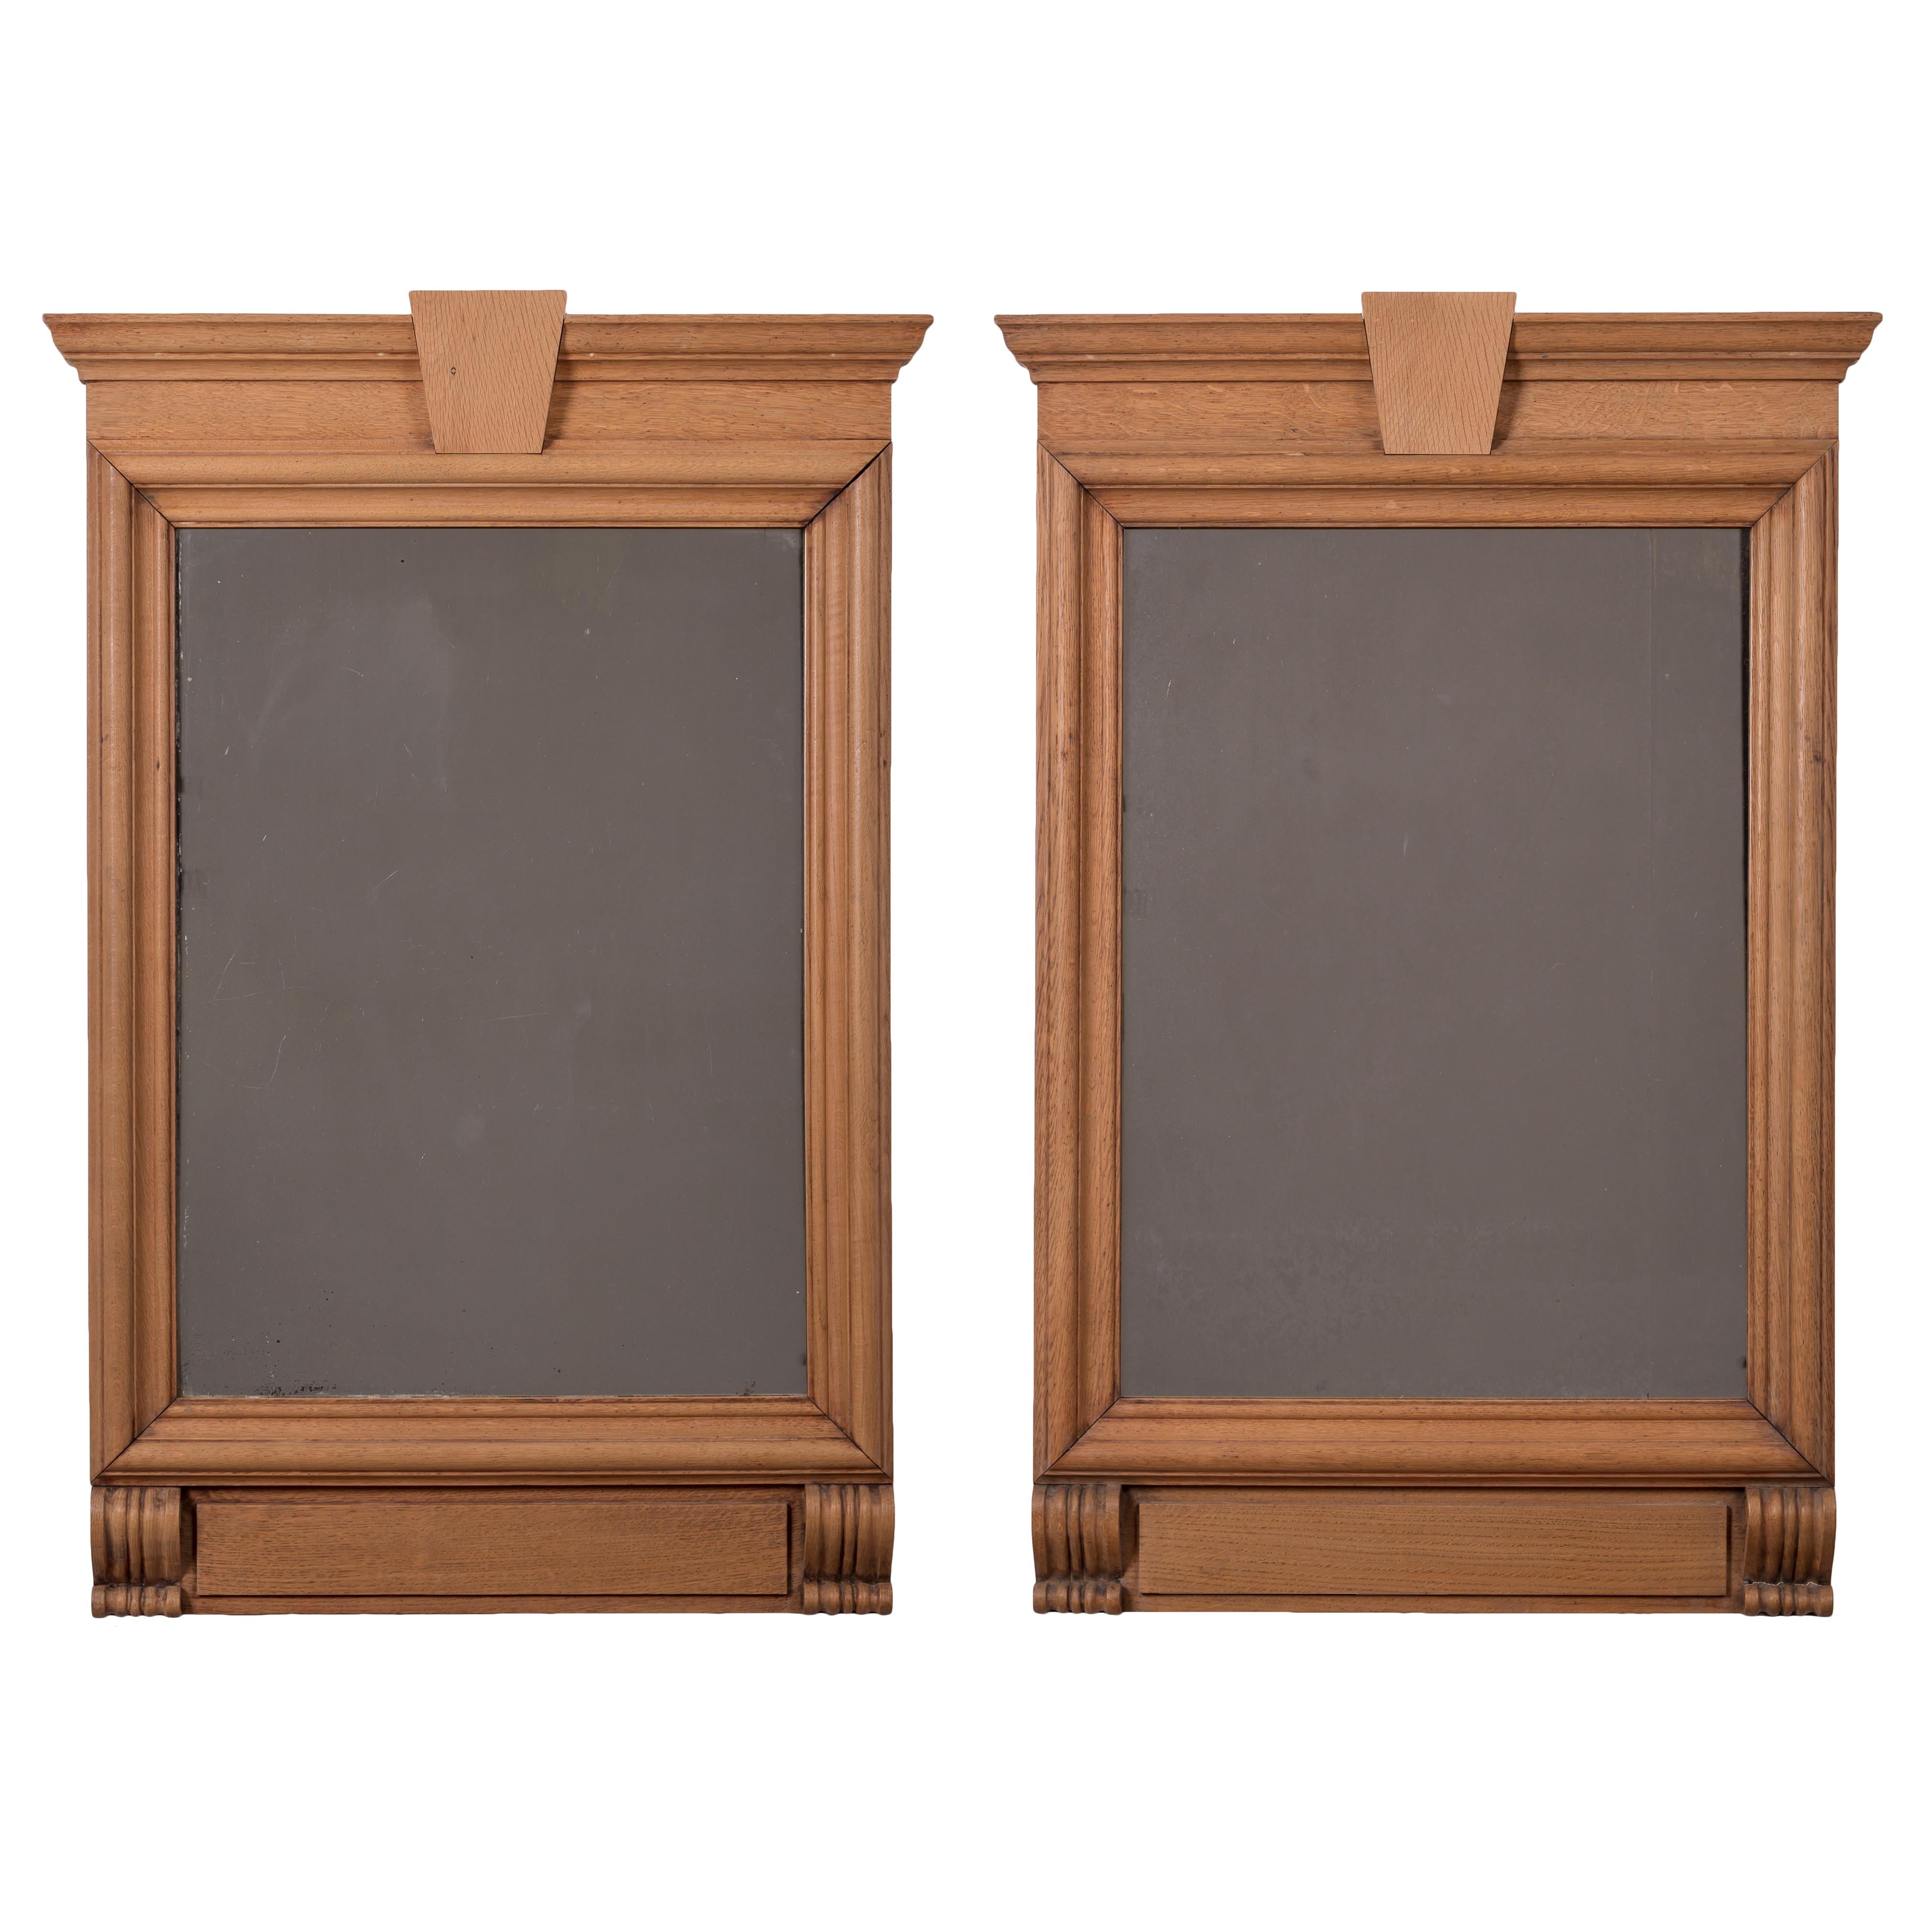 A pair of French neoclassical style limed oak trumeau mirrors, 19th century.
Antique plates; molded cornice above linear frames supported by two carved brackets.

28 ¾ inches wide by 43 inches tall by 2 ¼ inches deep